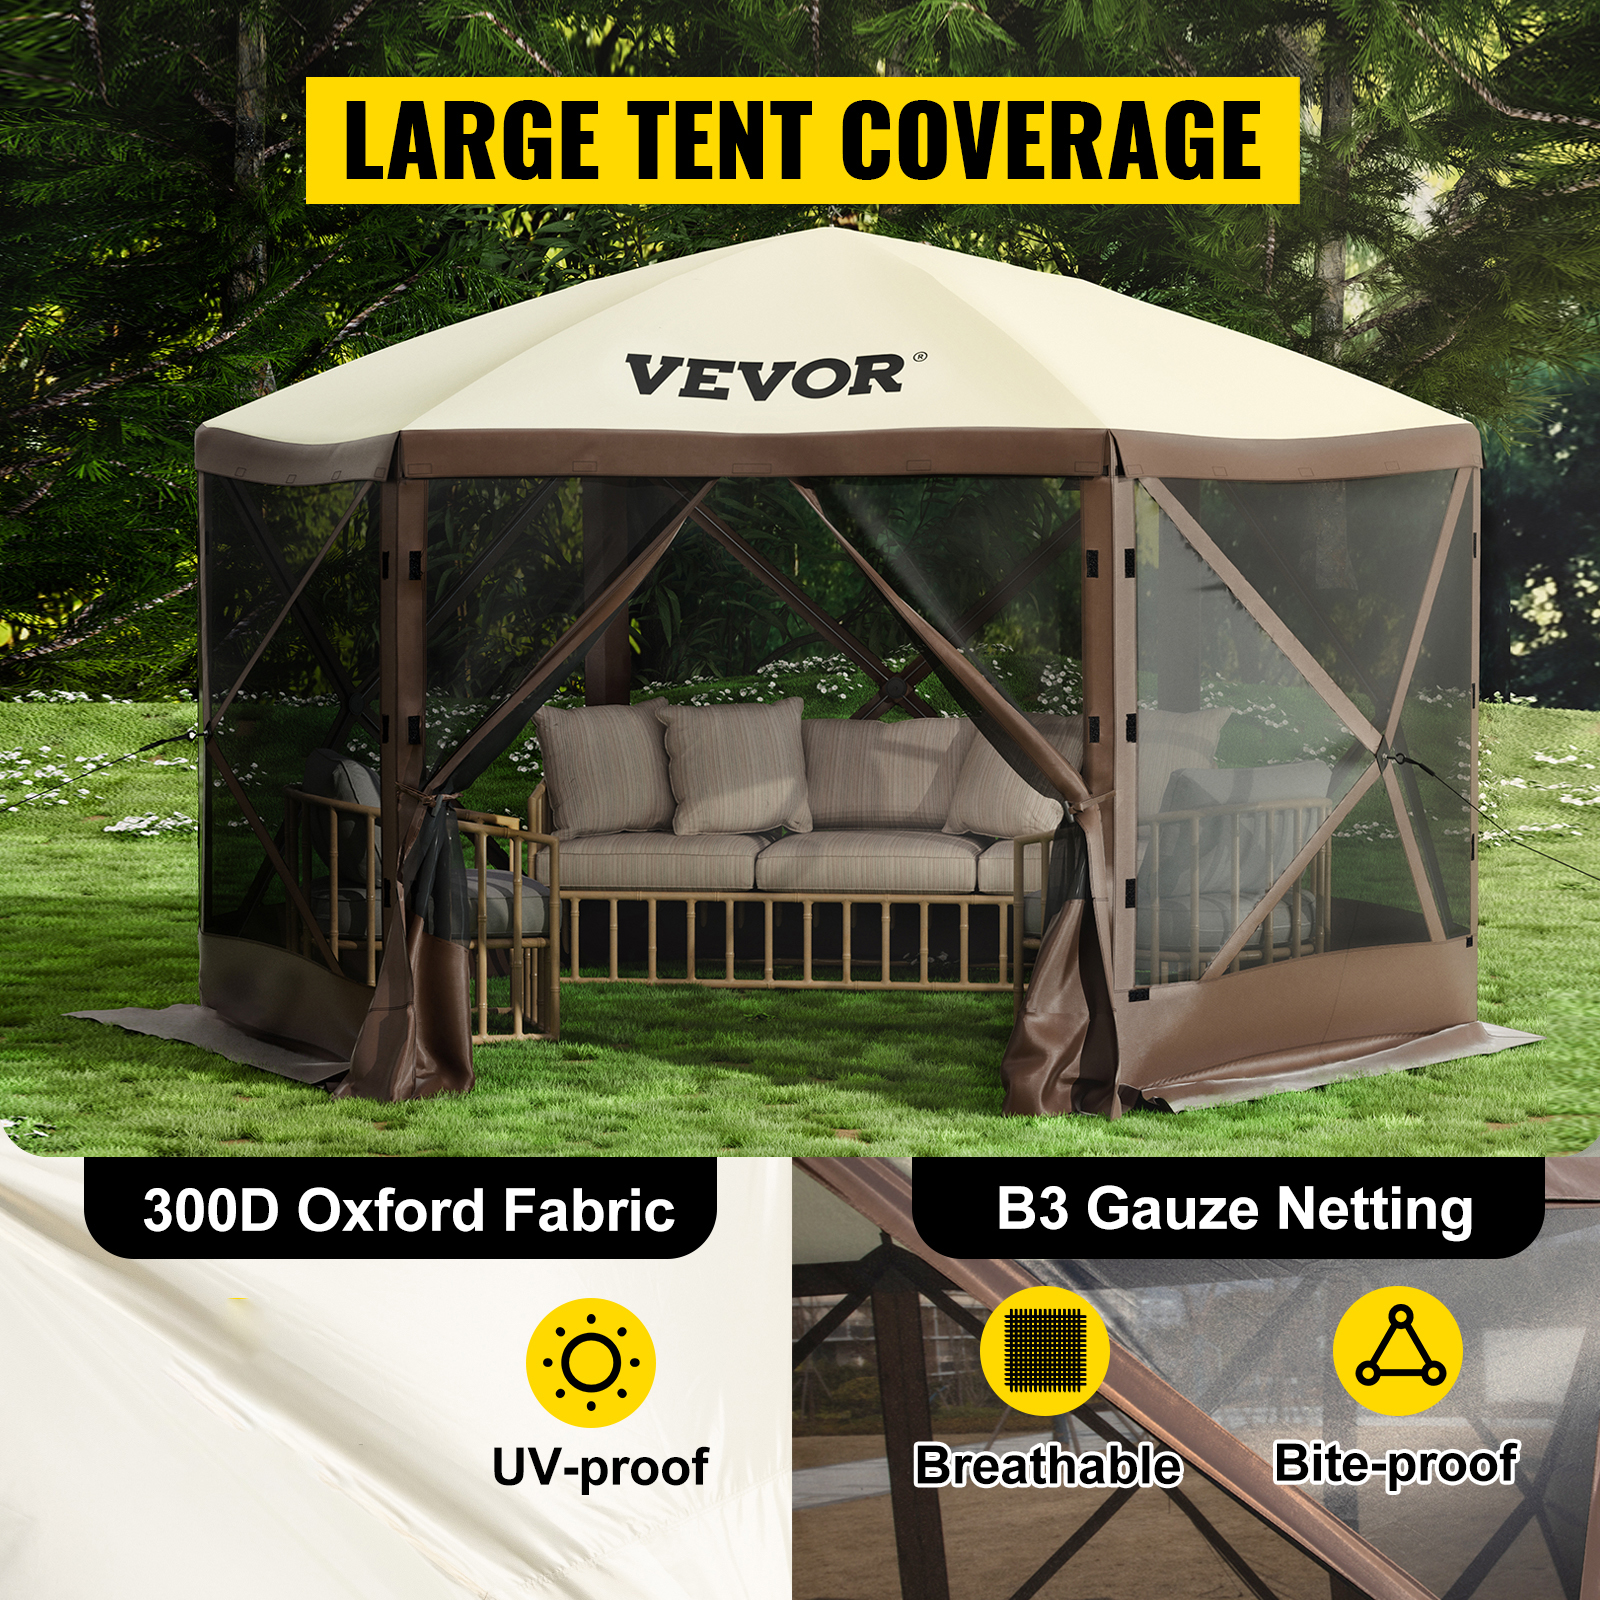 10'x10' Brown & Beige 6 Sided Pop-up Canopy Screen Tent for 8 Person Camping Waterproof Screen Shelter w/Portable Storage Bag VEVOR Camping Gazebo Tent Mesh Windows Ground Stakes 